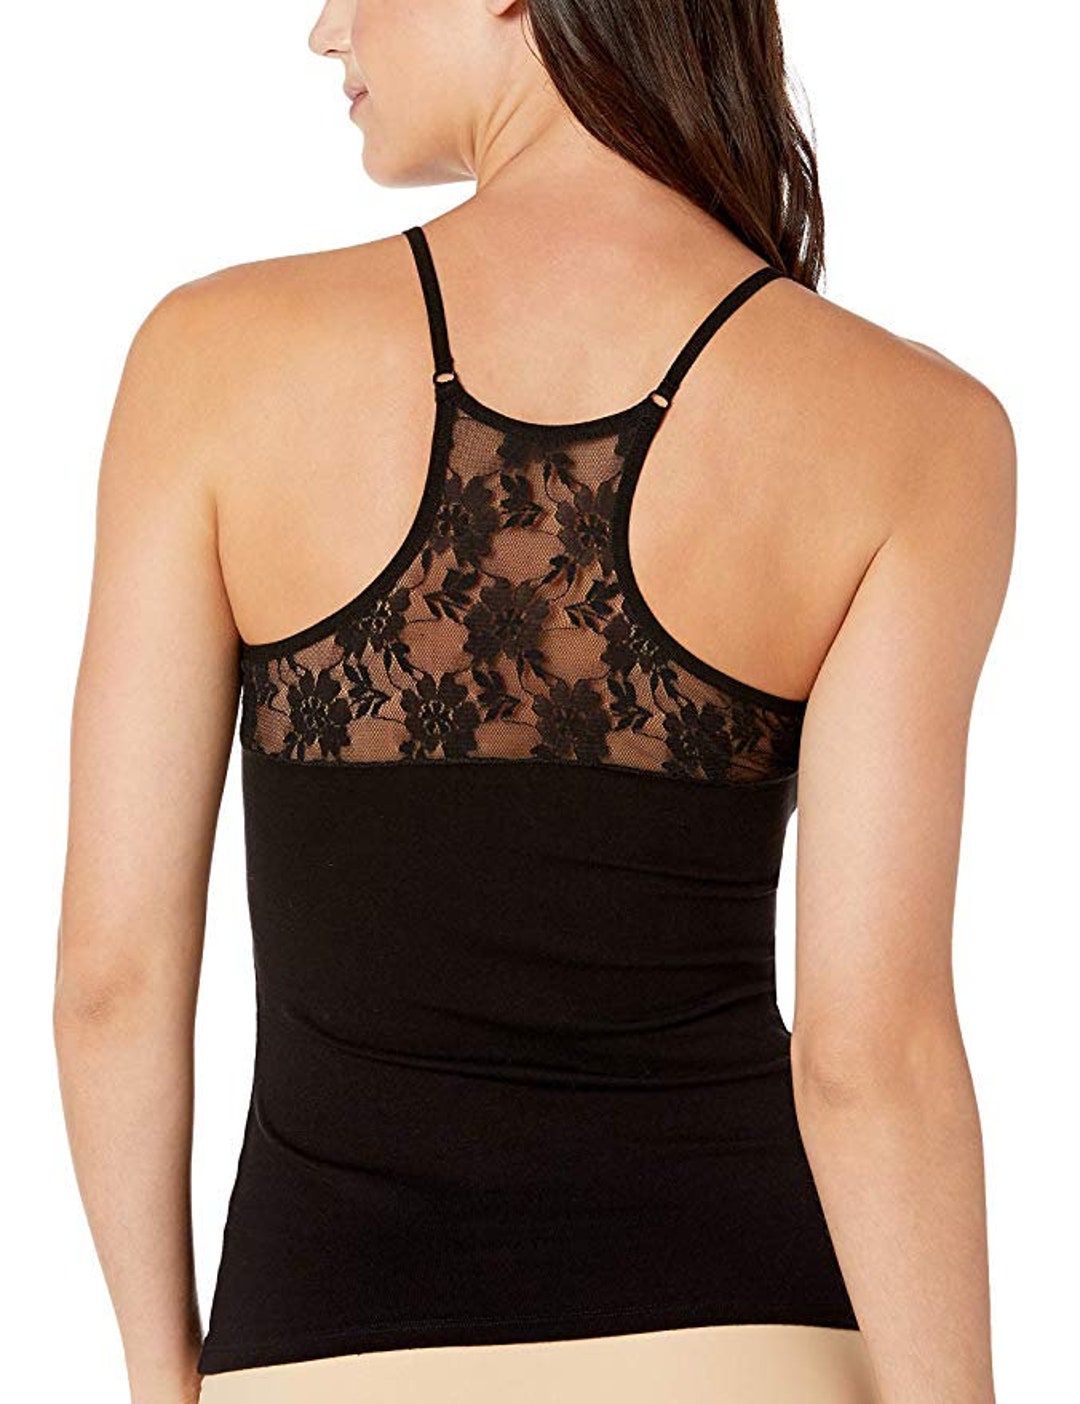 Women's Dressy Cami Tank Tops Fashion Lace Camisole, Comfy Durable